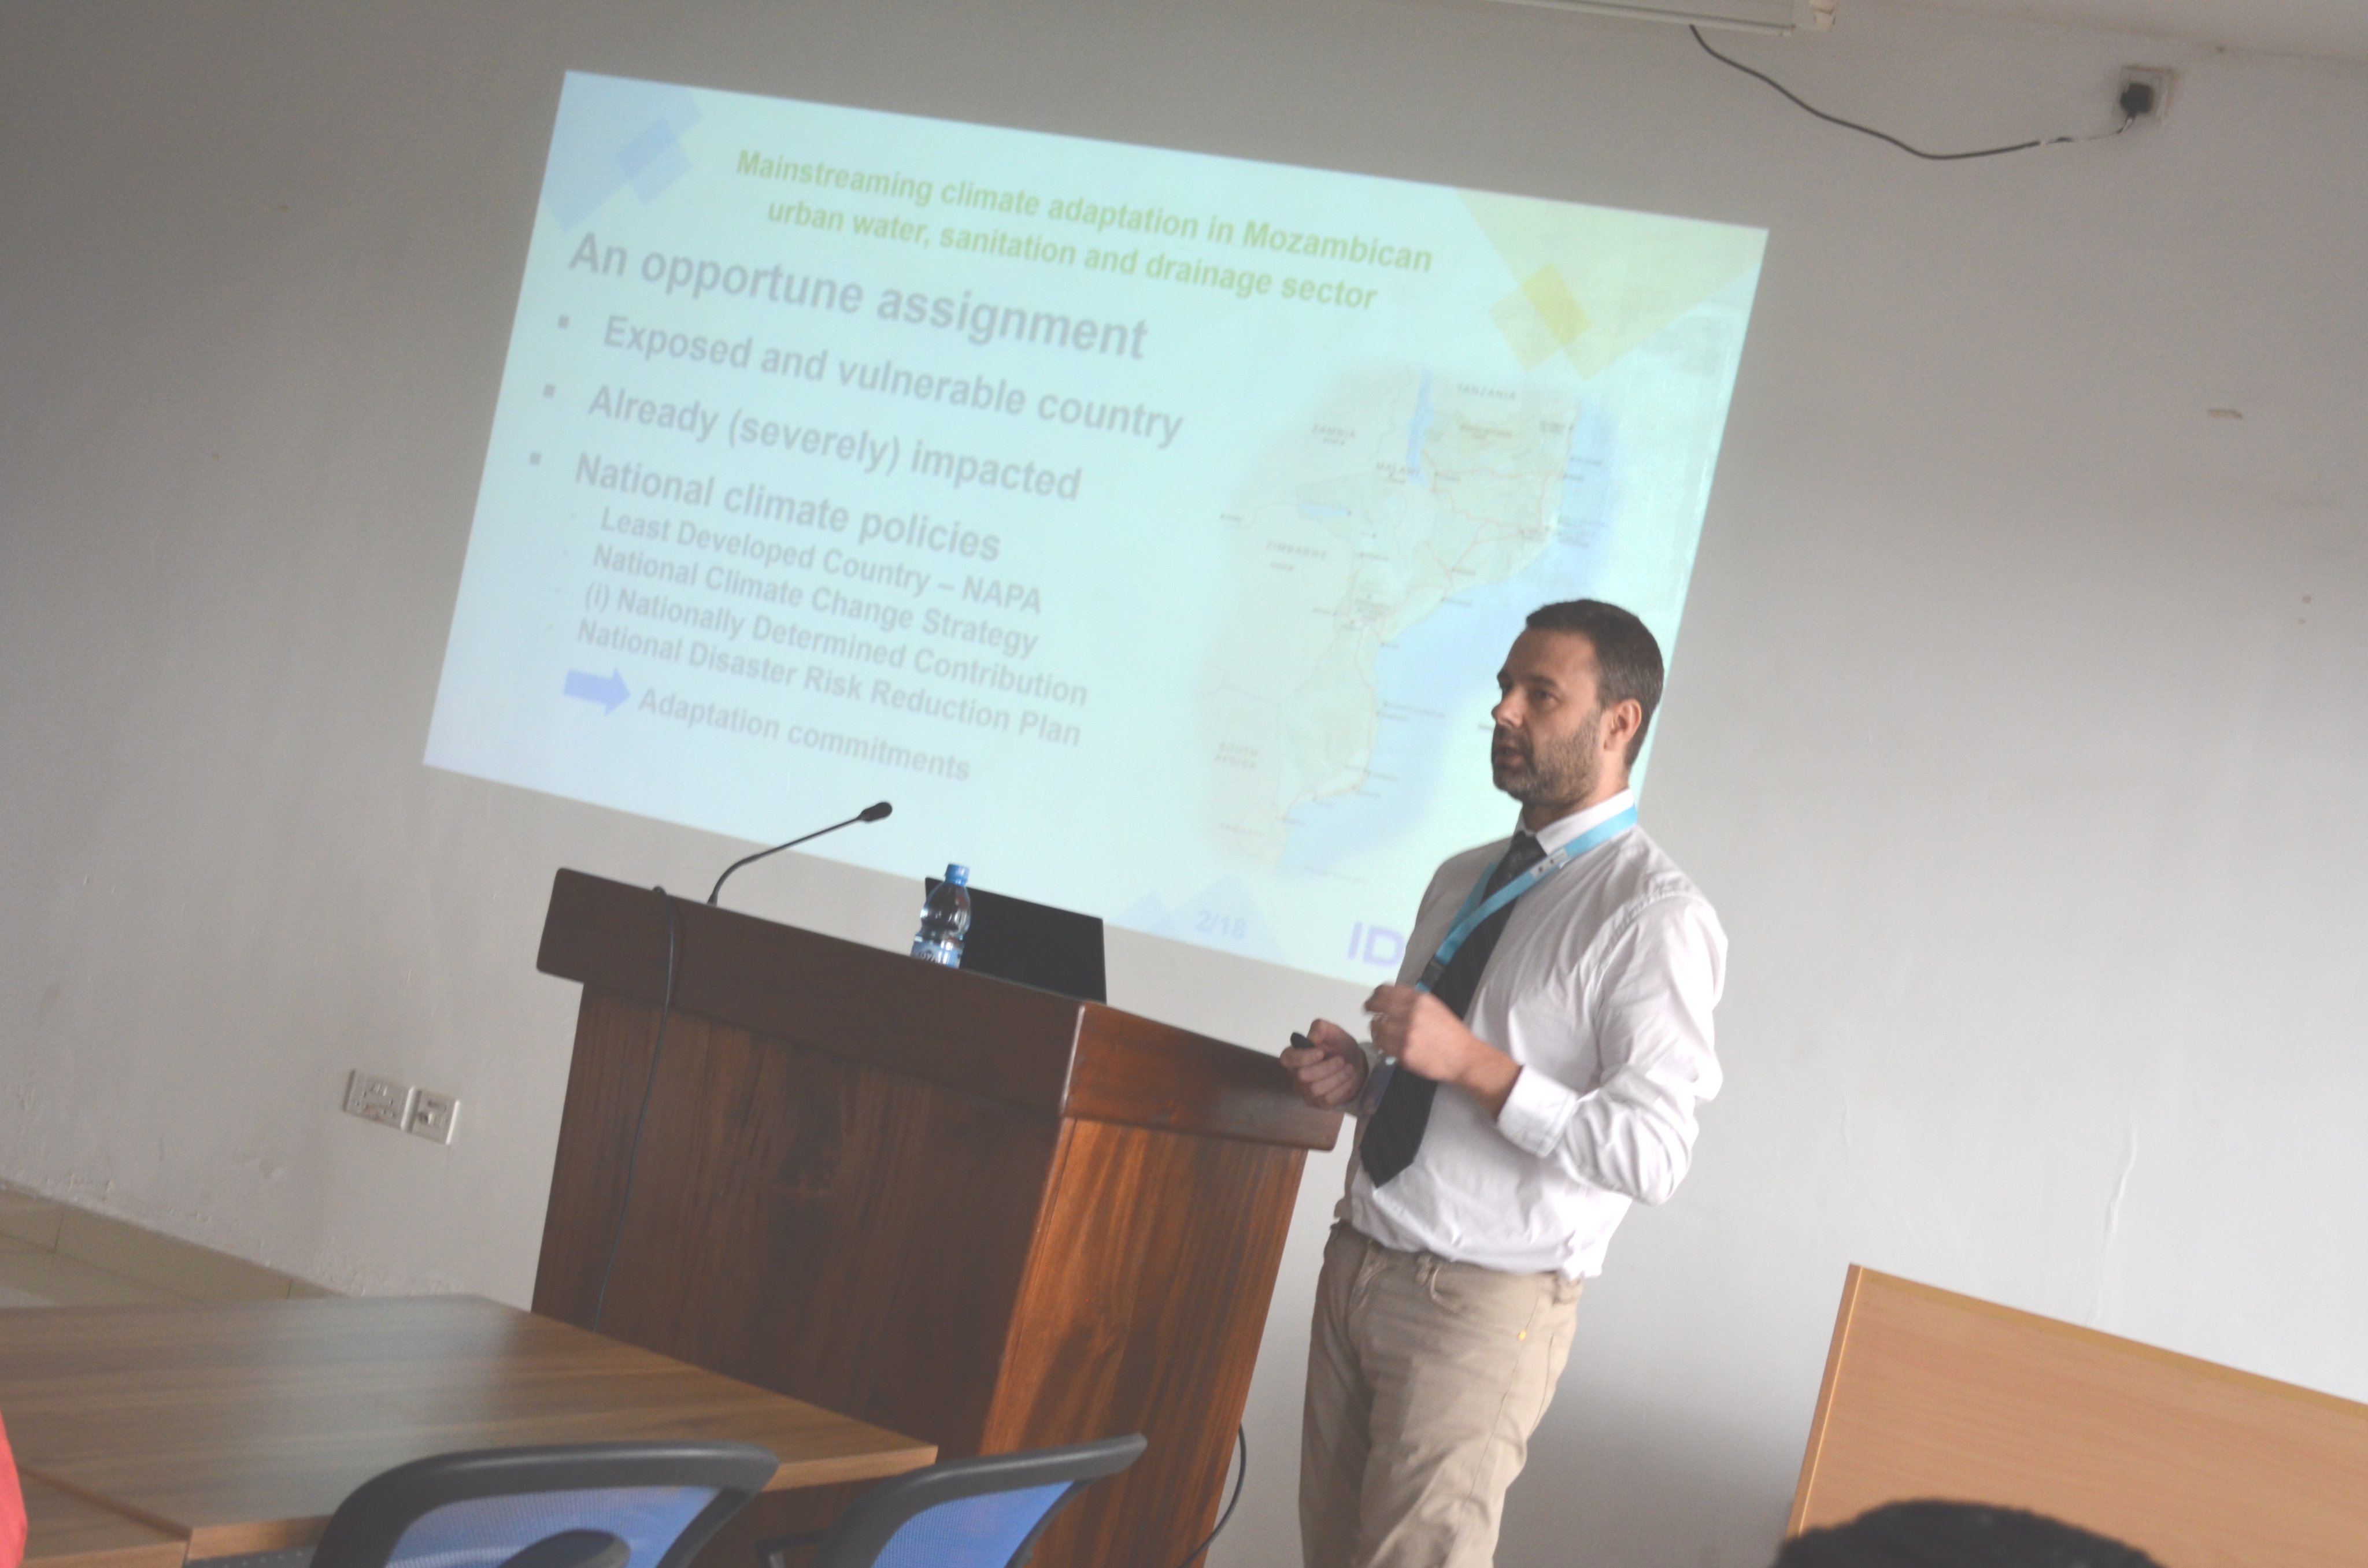 Pedro Muradas IDOM presents during the 3rd symposium on Climate Change Adaption in Africa 24th Jan 2020